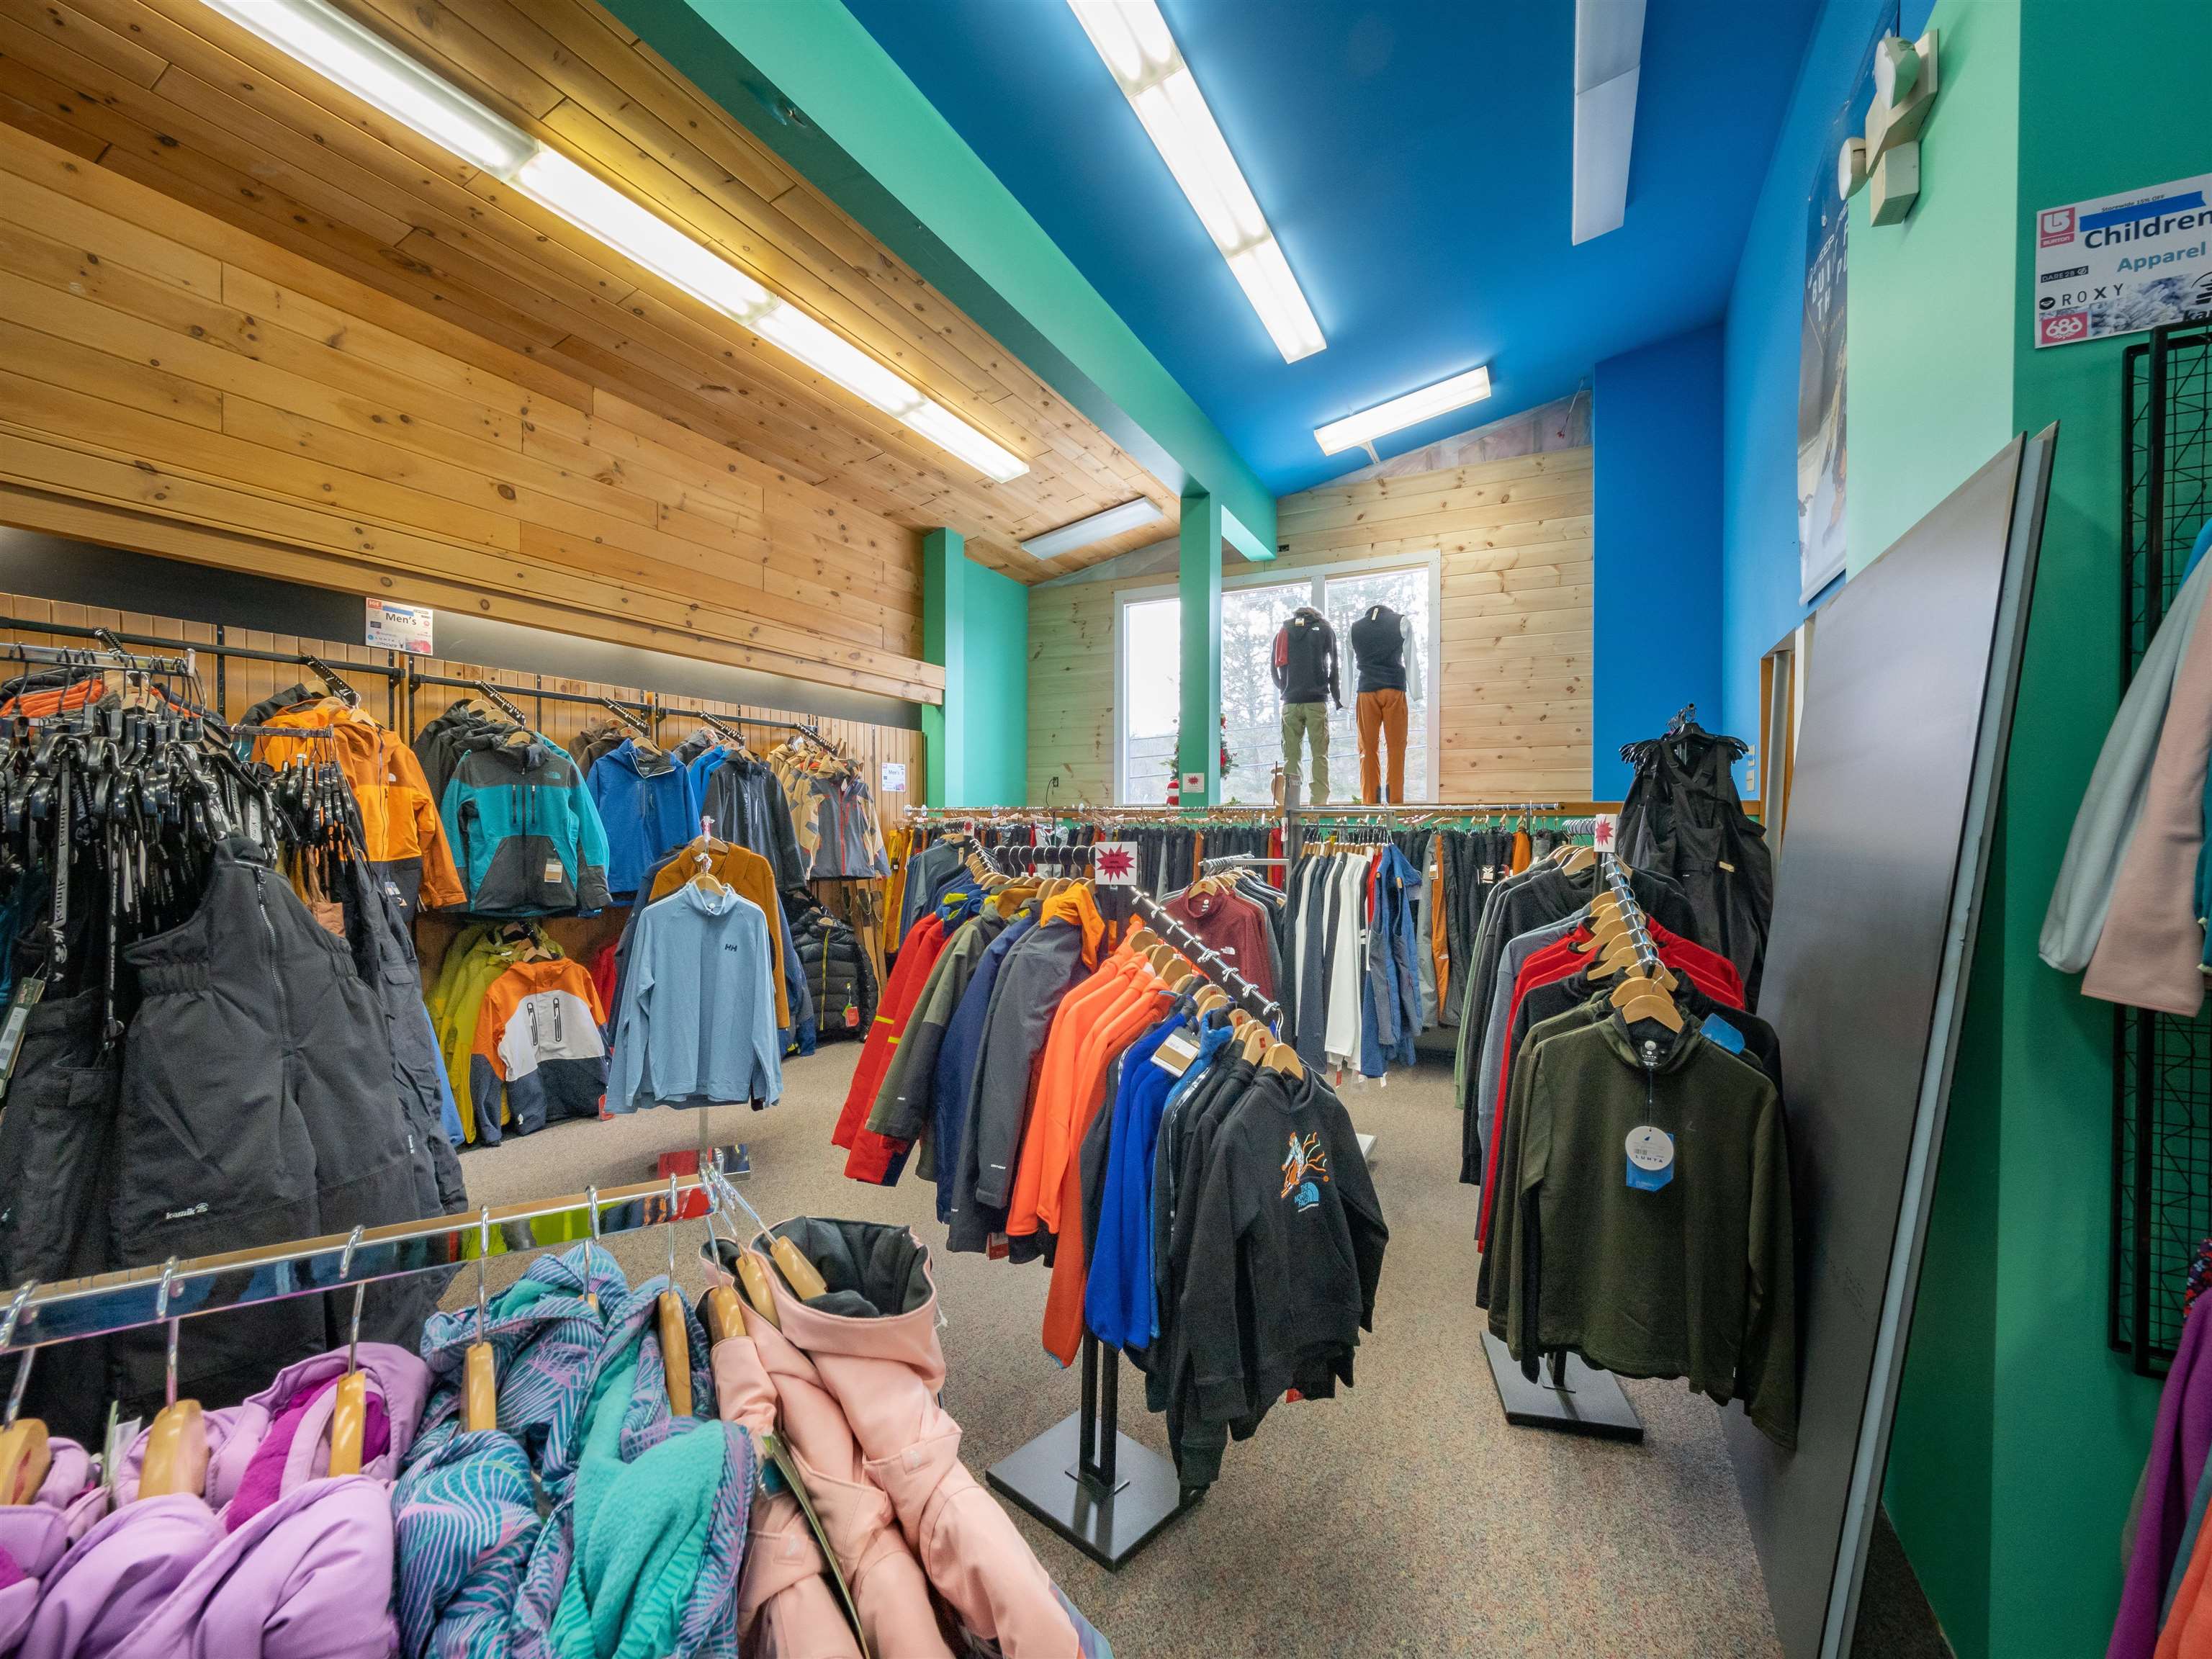 FREESTANDING AND WALL DISPLAYS OF JACKETS